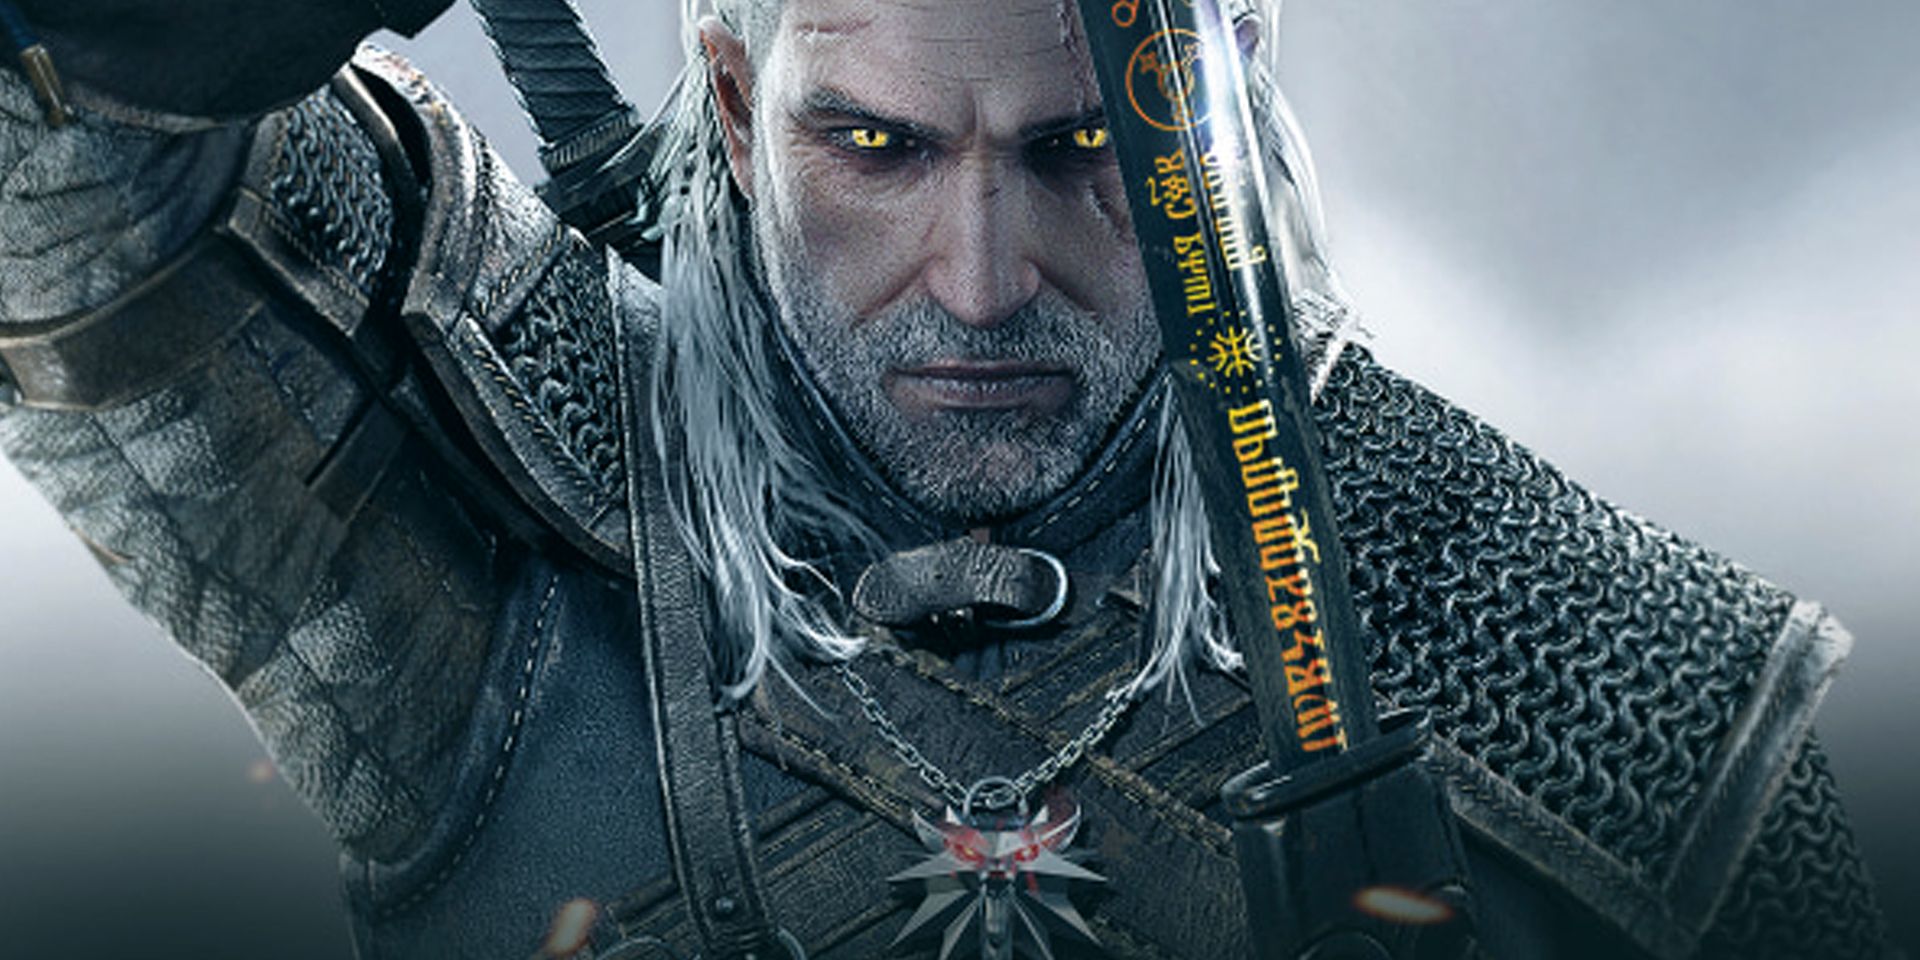 Geralt with glowing yellow eyes in The Witcher Games